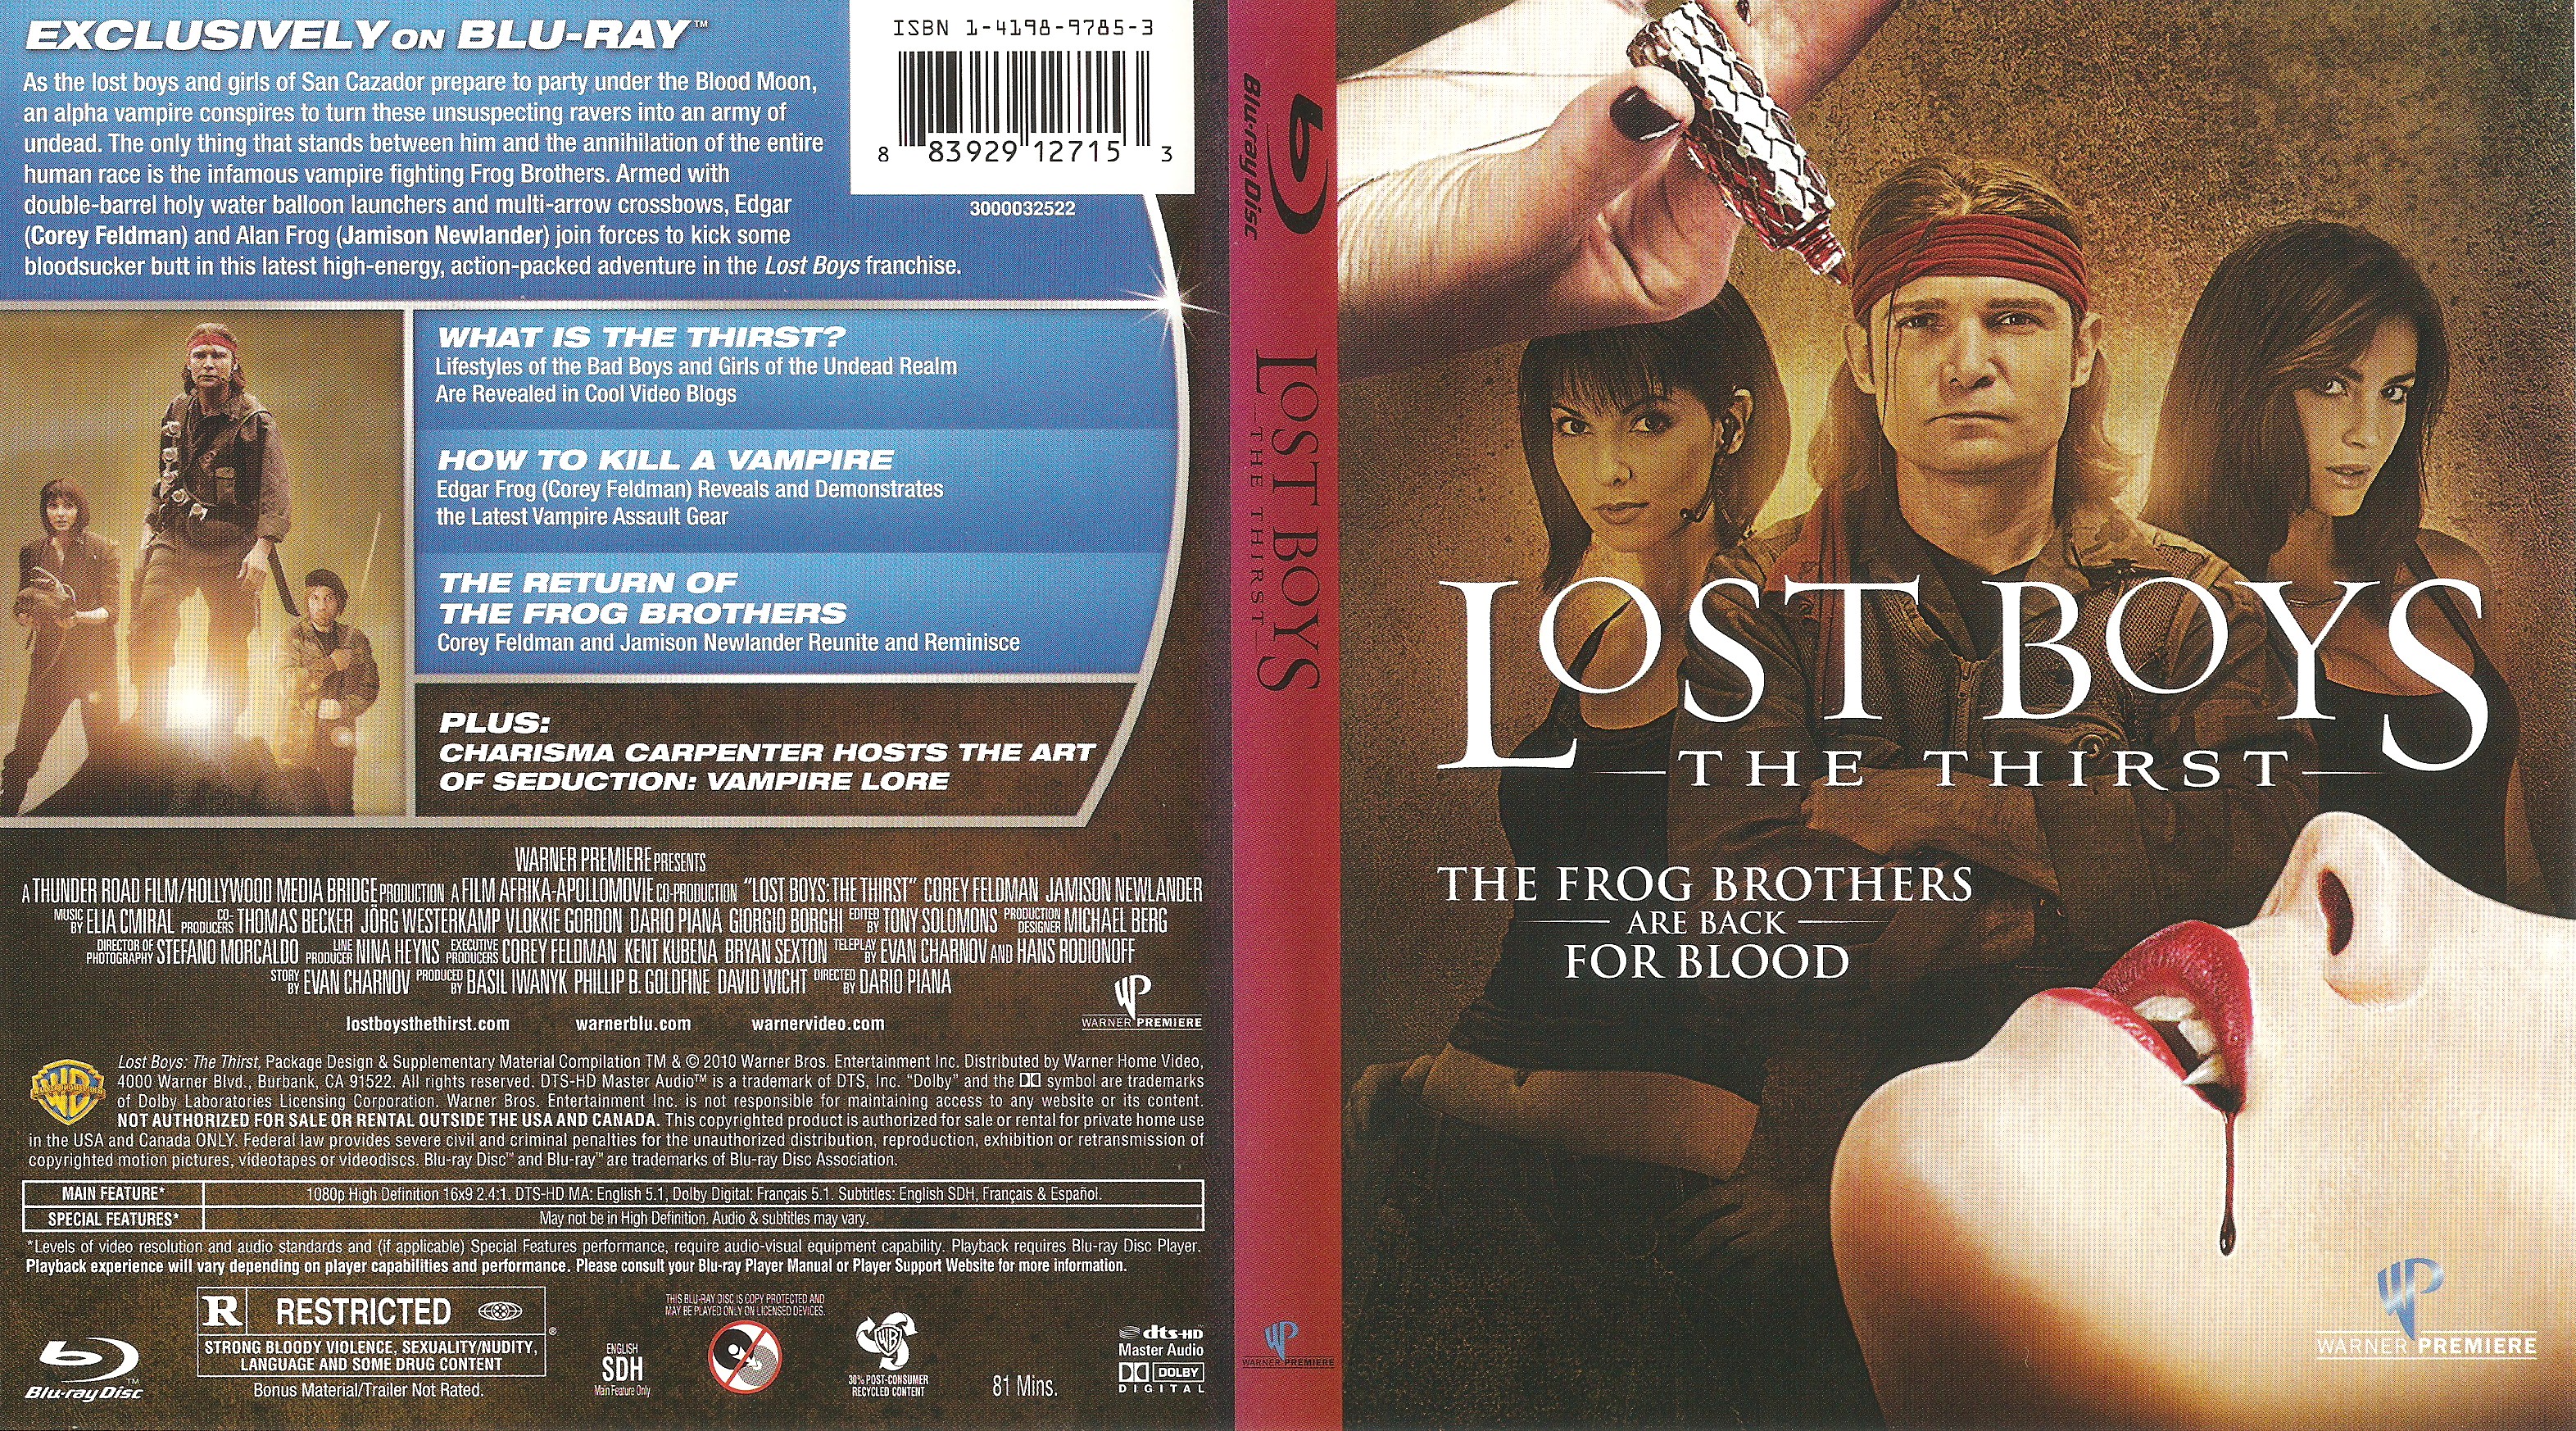 Jaquette DVD Gnration Perdue 3 (Lost Boys The Thirst) Zone 1 (BLU-RAY)